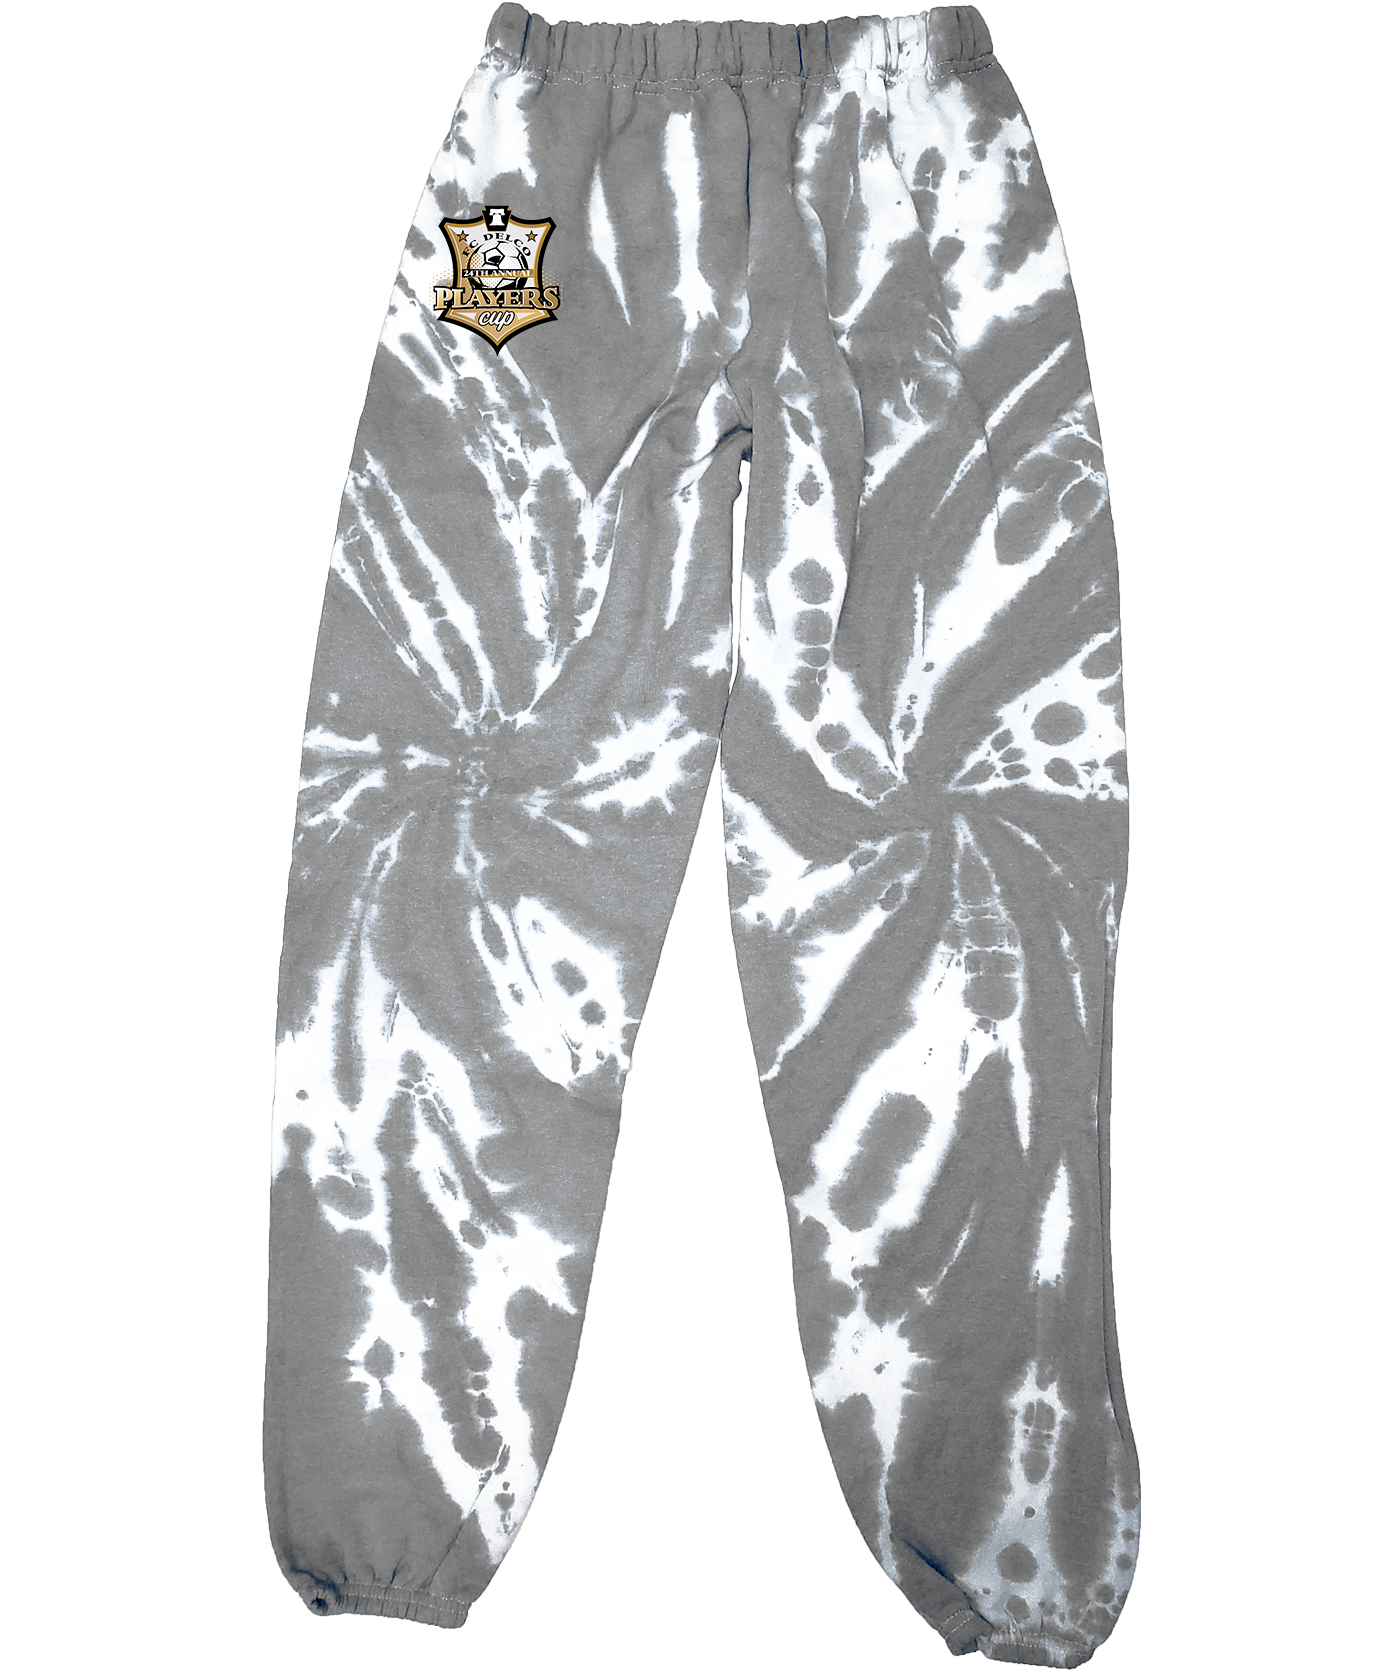 SWEAT PANTS - 2023 FC DELCO Players Cup